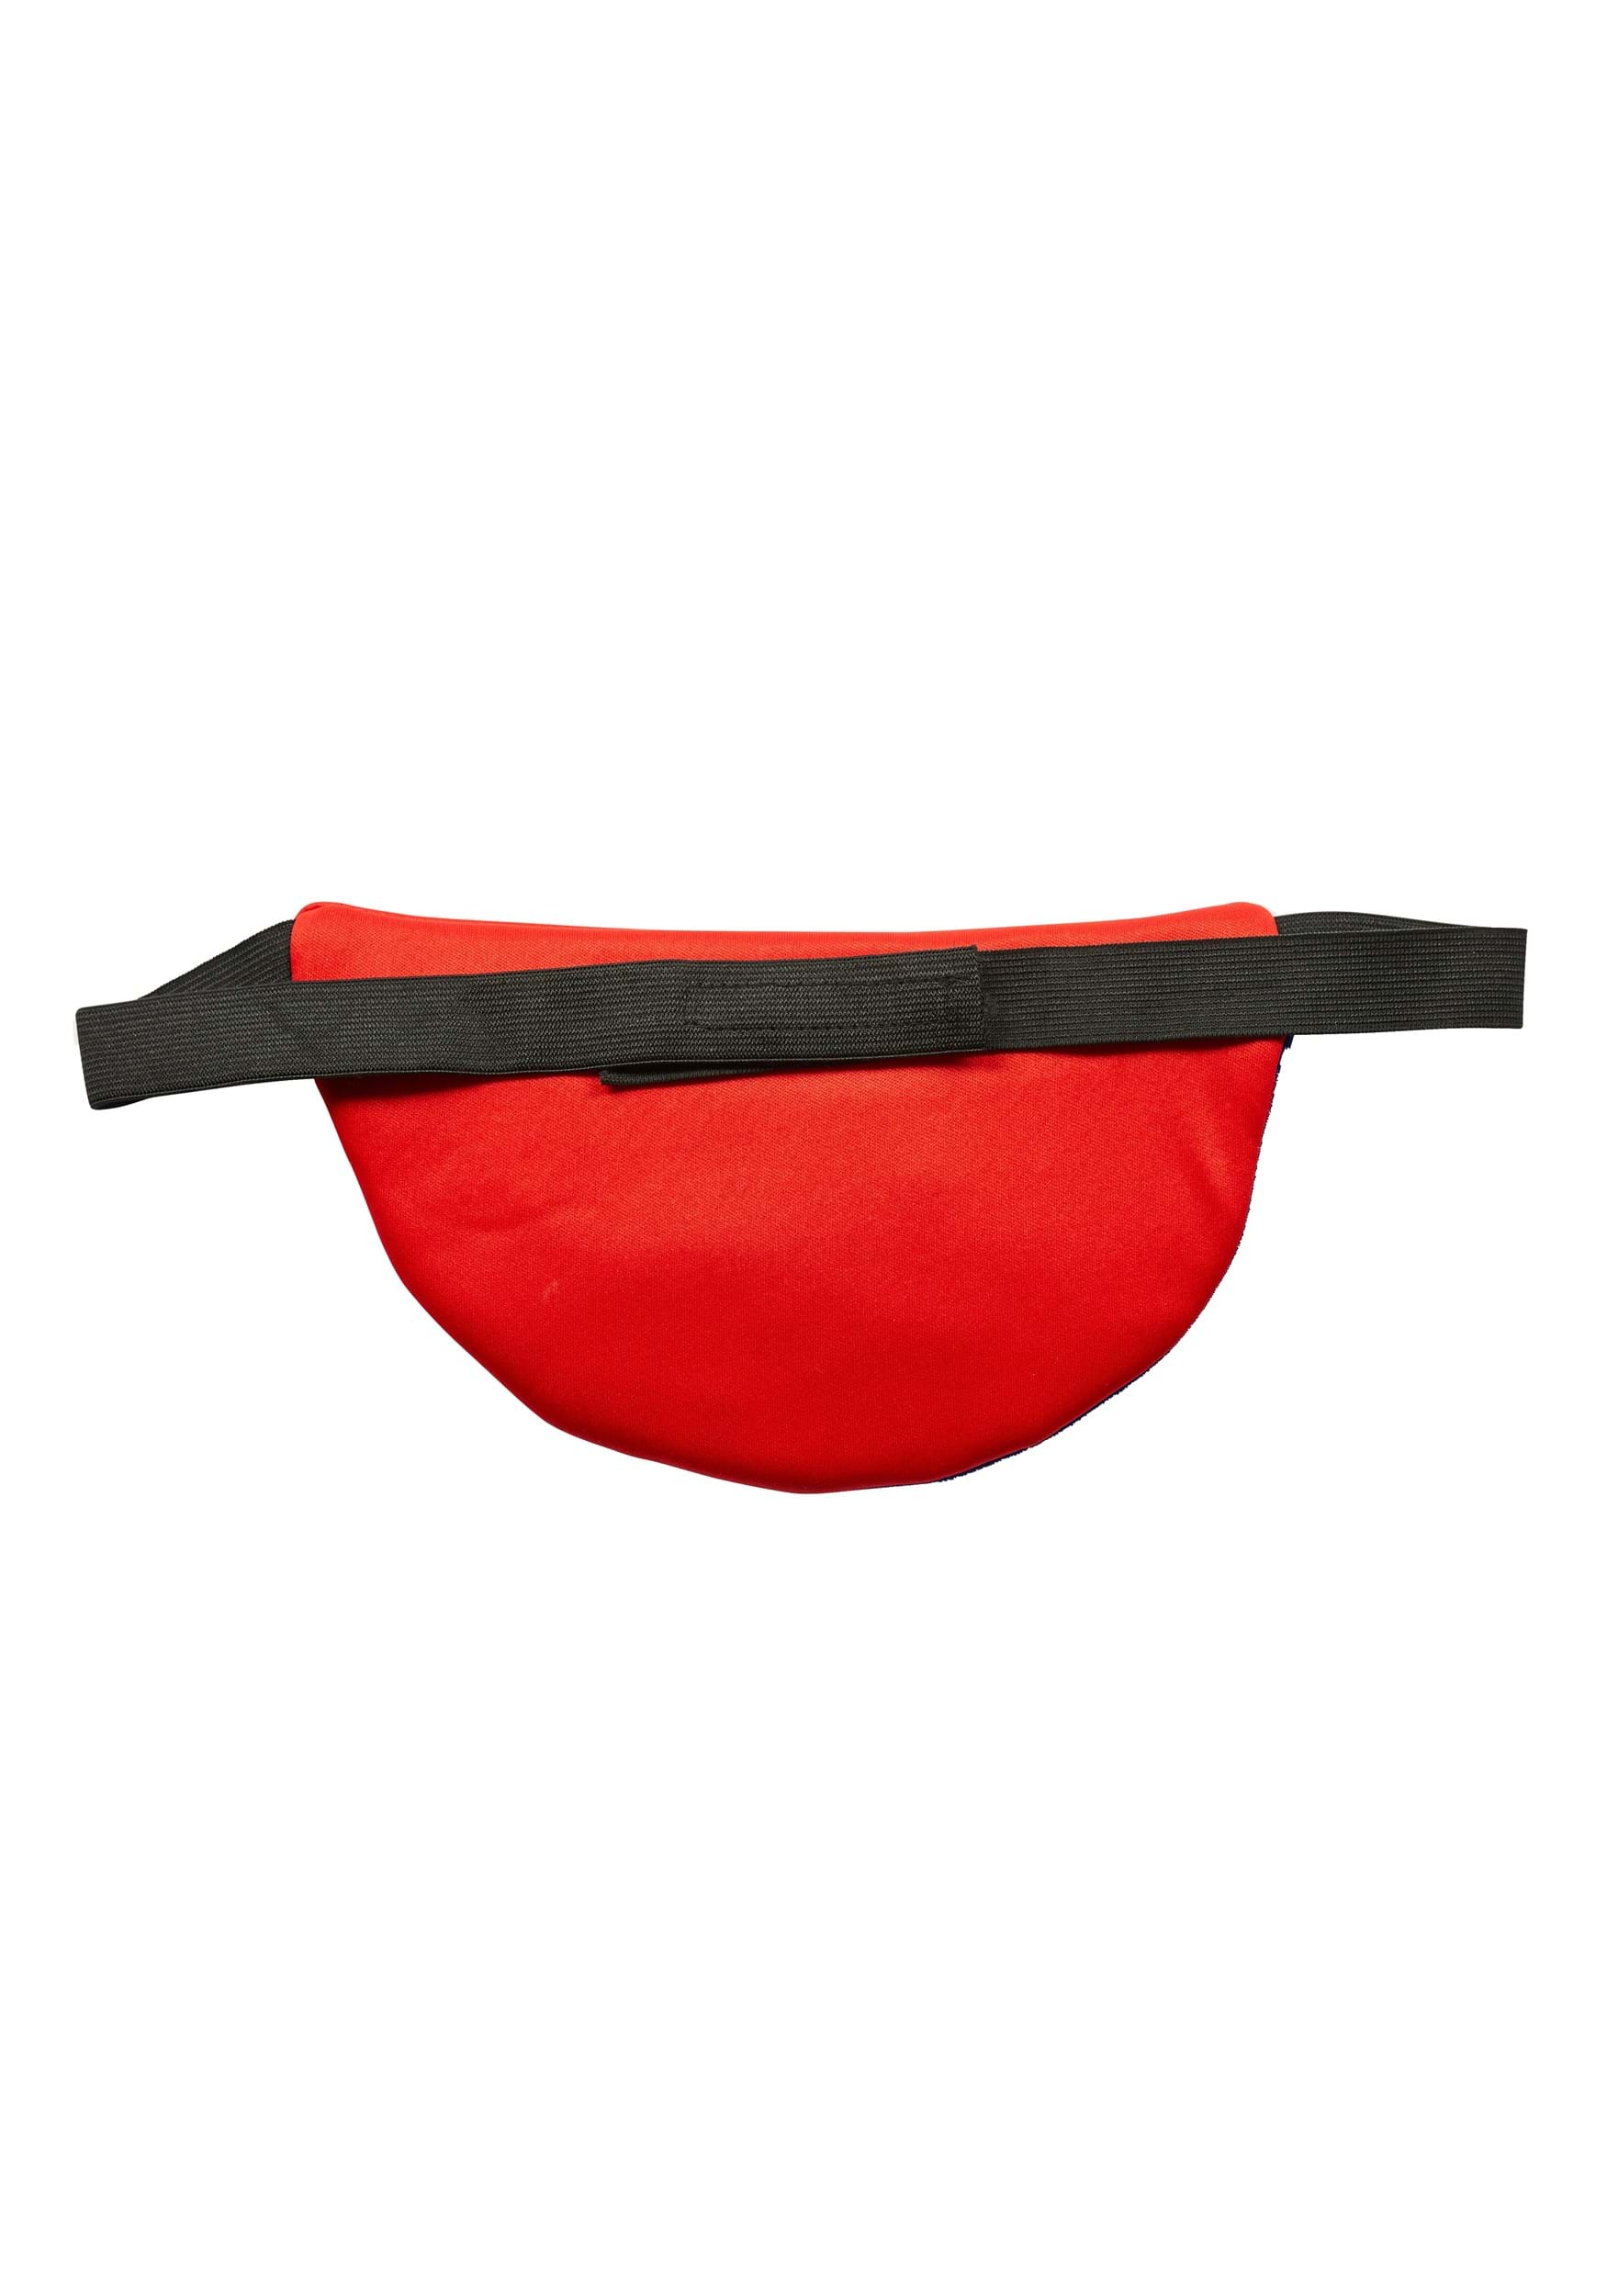 USA Star Fanny Pack